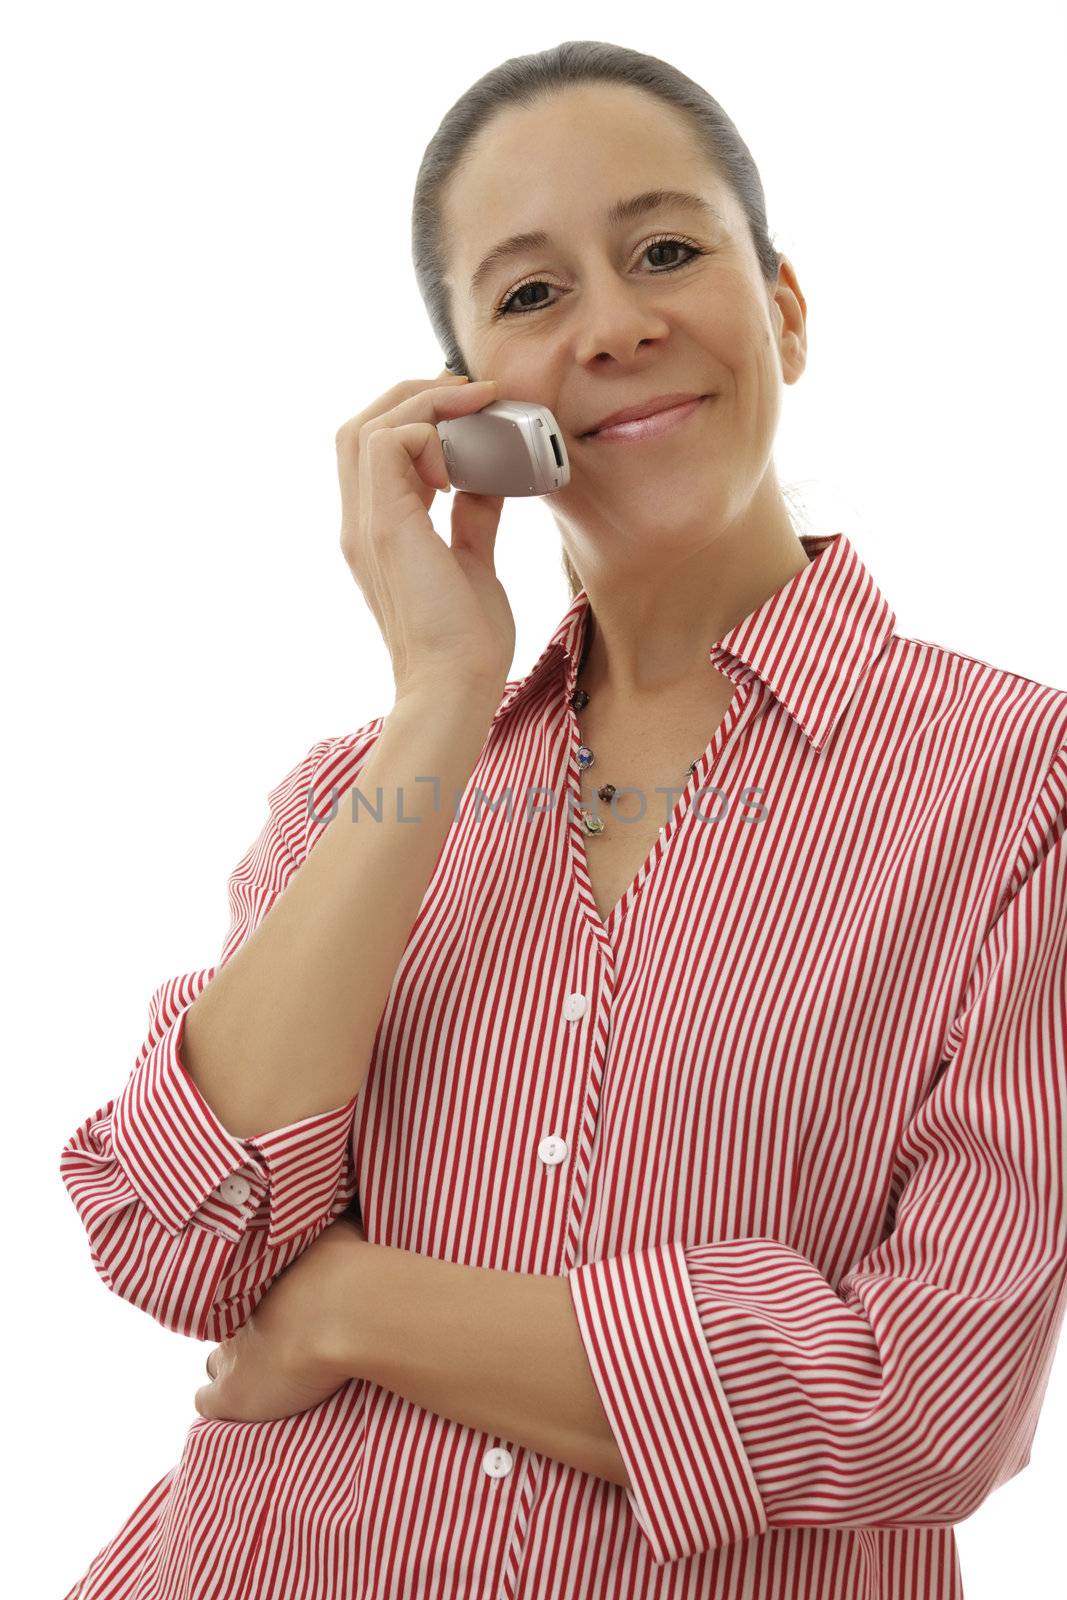 Single attractive businesswoman with mobile phone and smiling on a white background